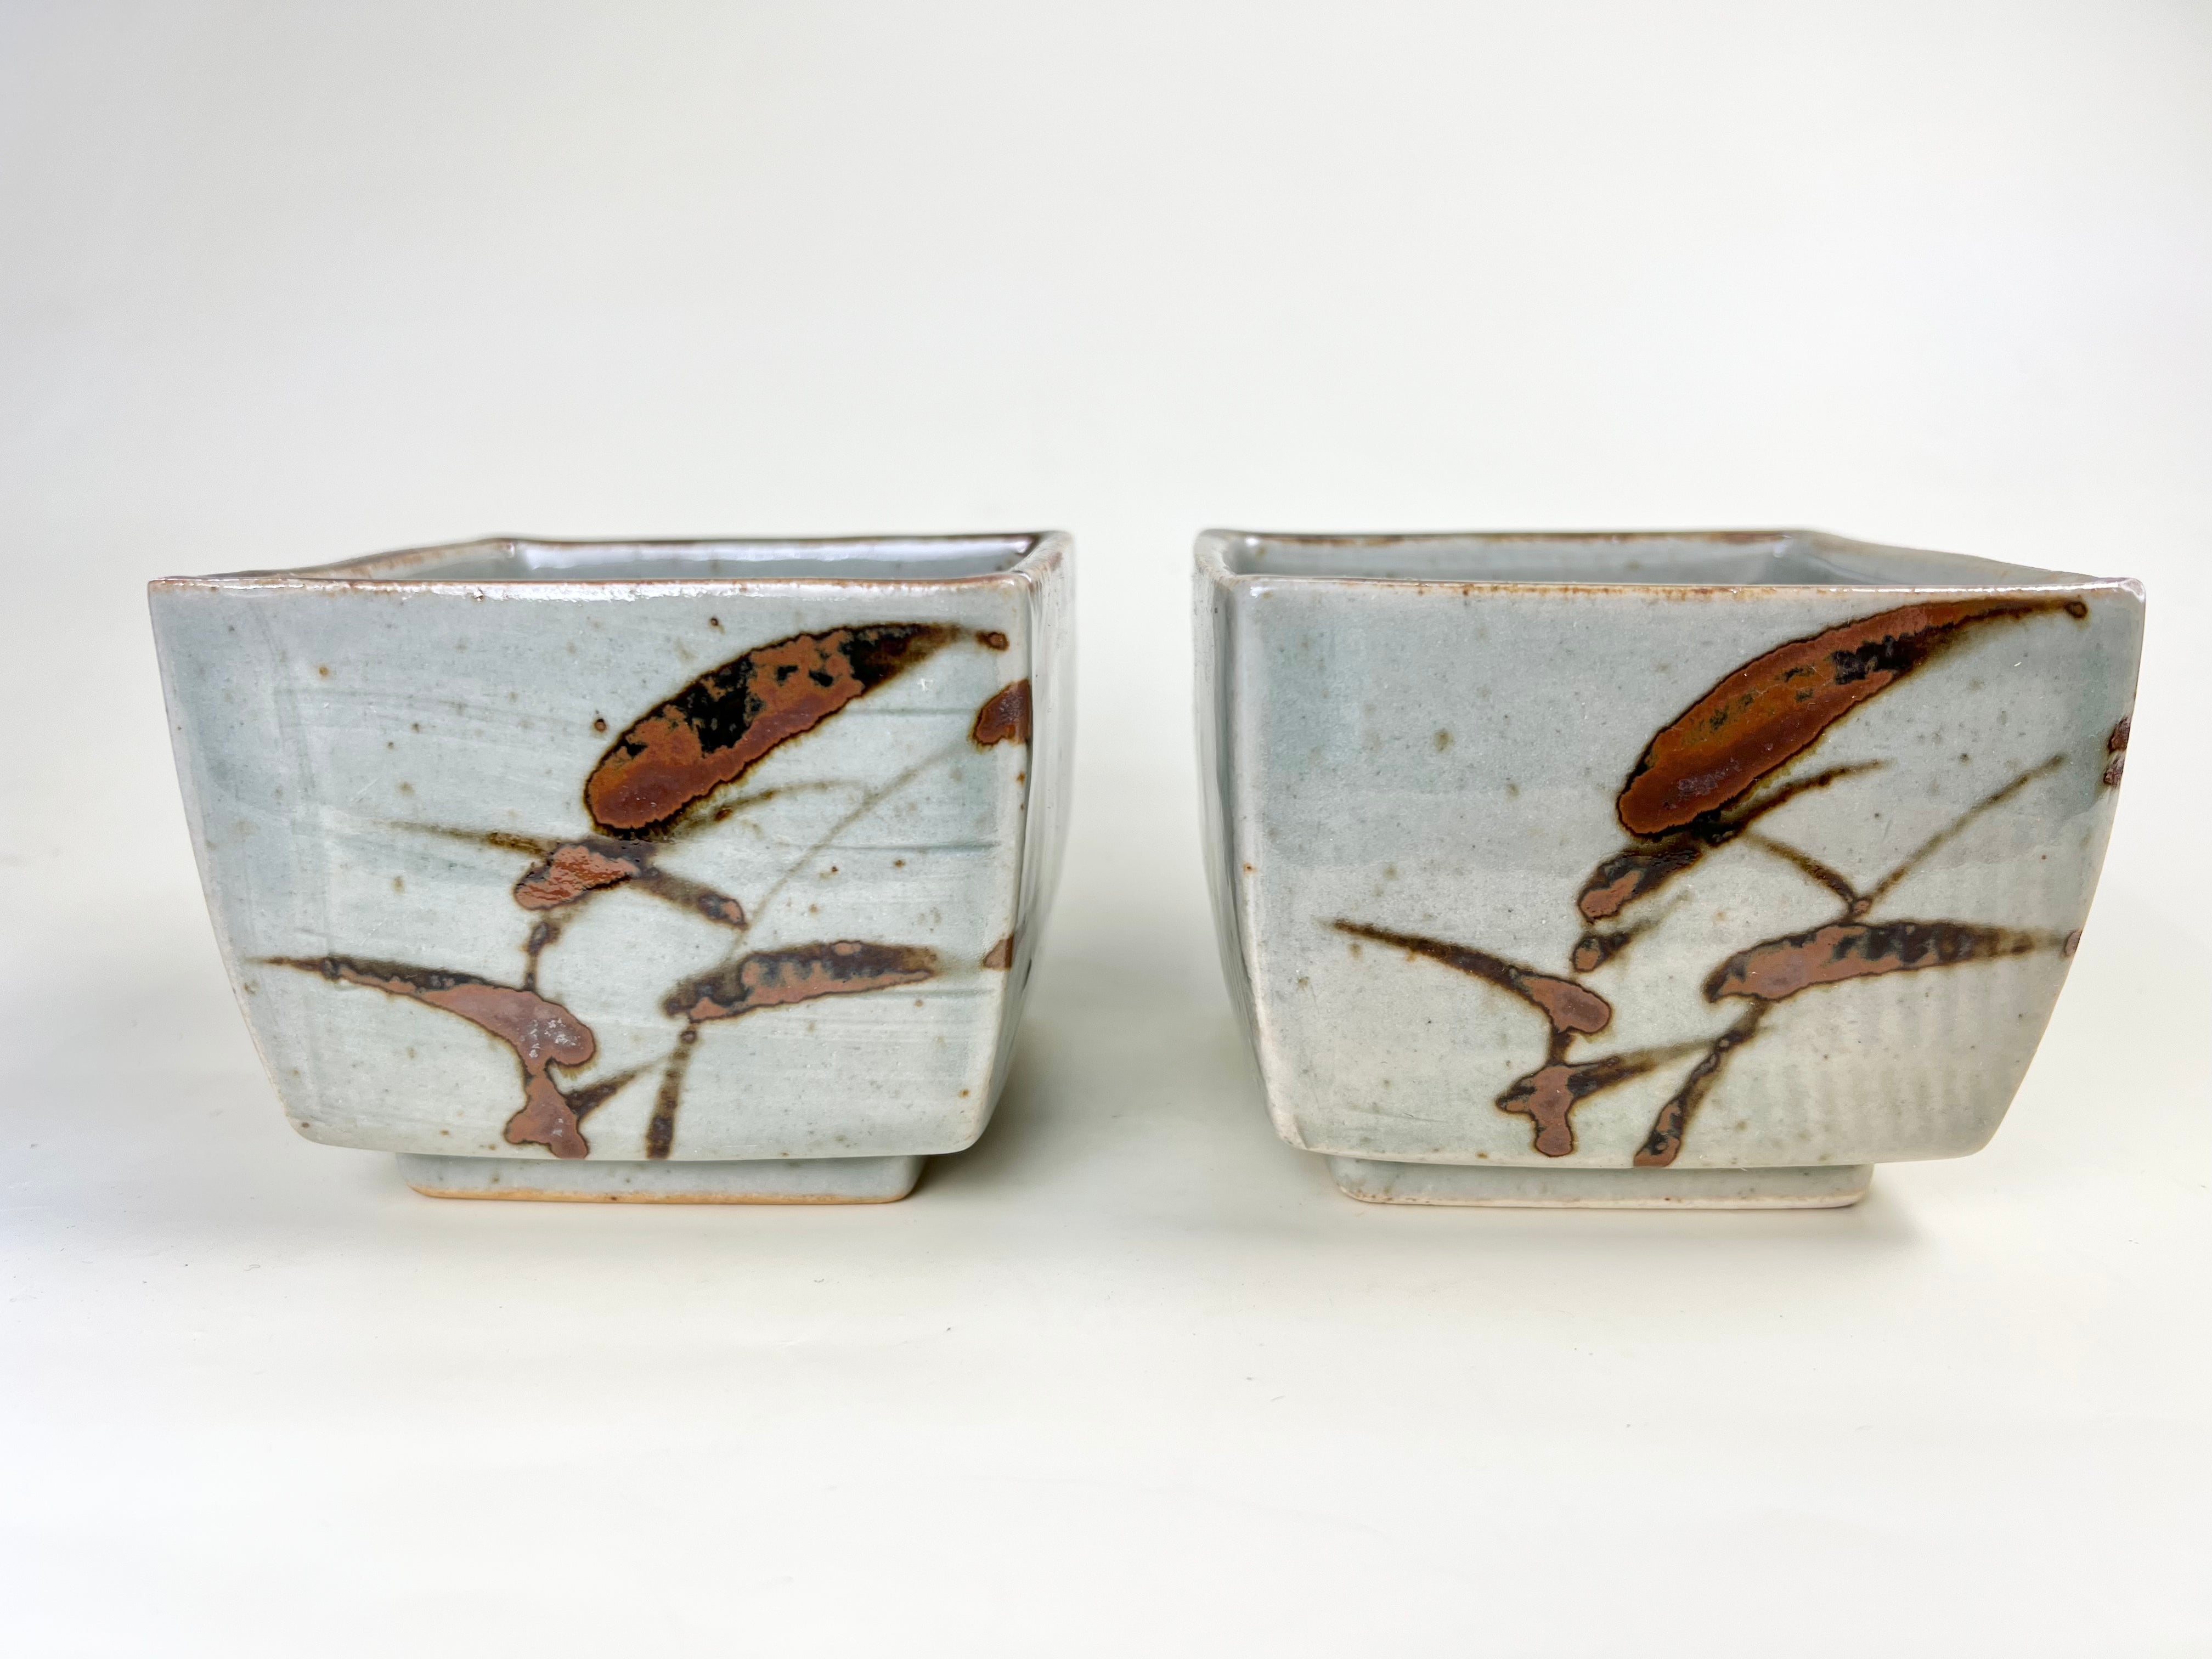 Pair of Square Glazed Pottery Bowls or Planters